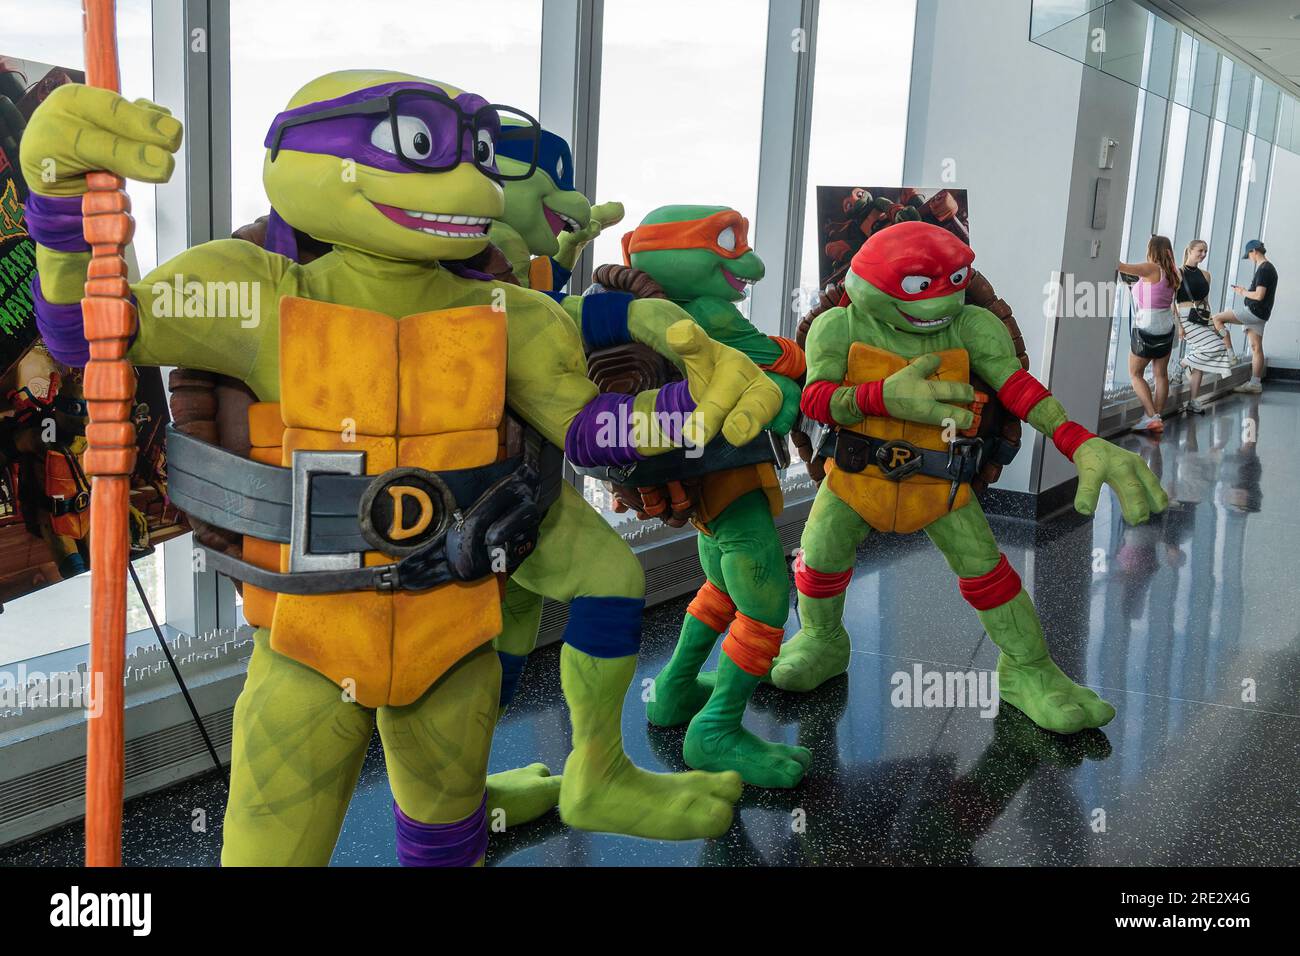 https://c8.alamy.com/comp/2RE2X4G/new-york-usa-24th-july-2023-teenage-mutant-ninja-turtles-characters-visit-one-world-observatory-in-new-york-on-july-24-2023-and-pose-with-visitors-in-anticipation-of-release-of-teenage-mutant-ninja-turtles-mutant-mayhem-blockbuster-movie-is-scheduled-for-release-on-august-2-2023-photo-by-lev-radinsipa-usa-credit-sipa-usaalamy-live-news-2RE2X4G.jpg